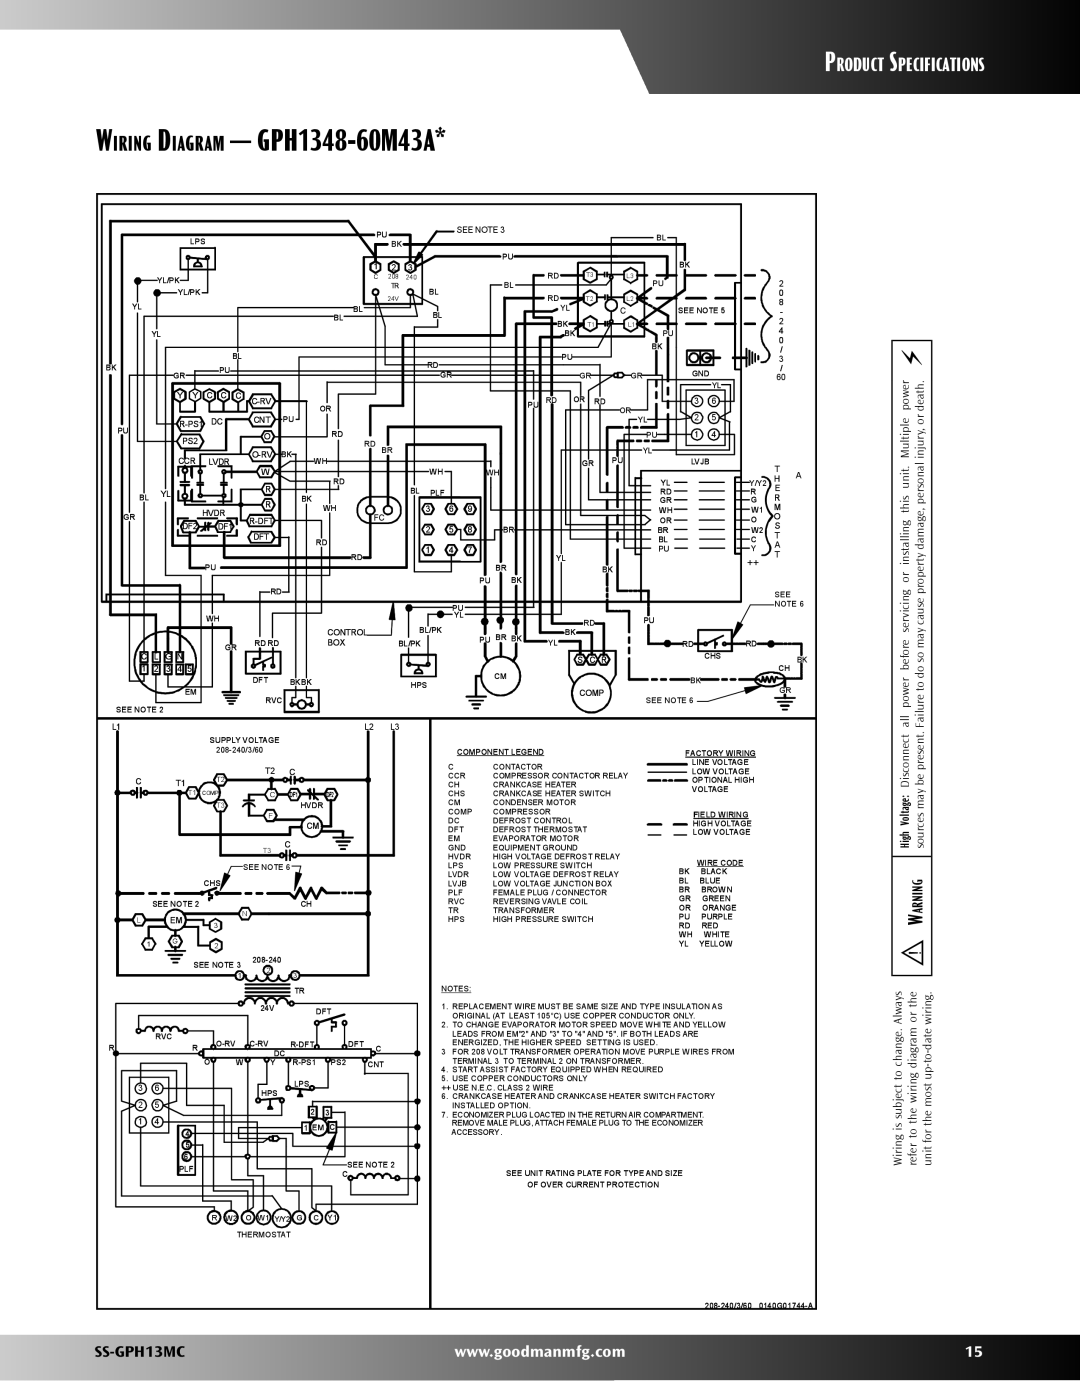 Goodman Mfg SS-GPH13MC warranty Wiring Diagram - GPH1348-60M43A, Product Specifications, High Voltage, See Note 